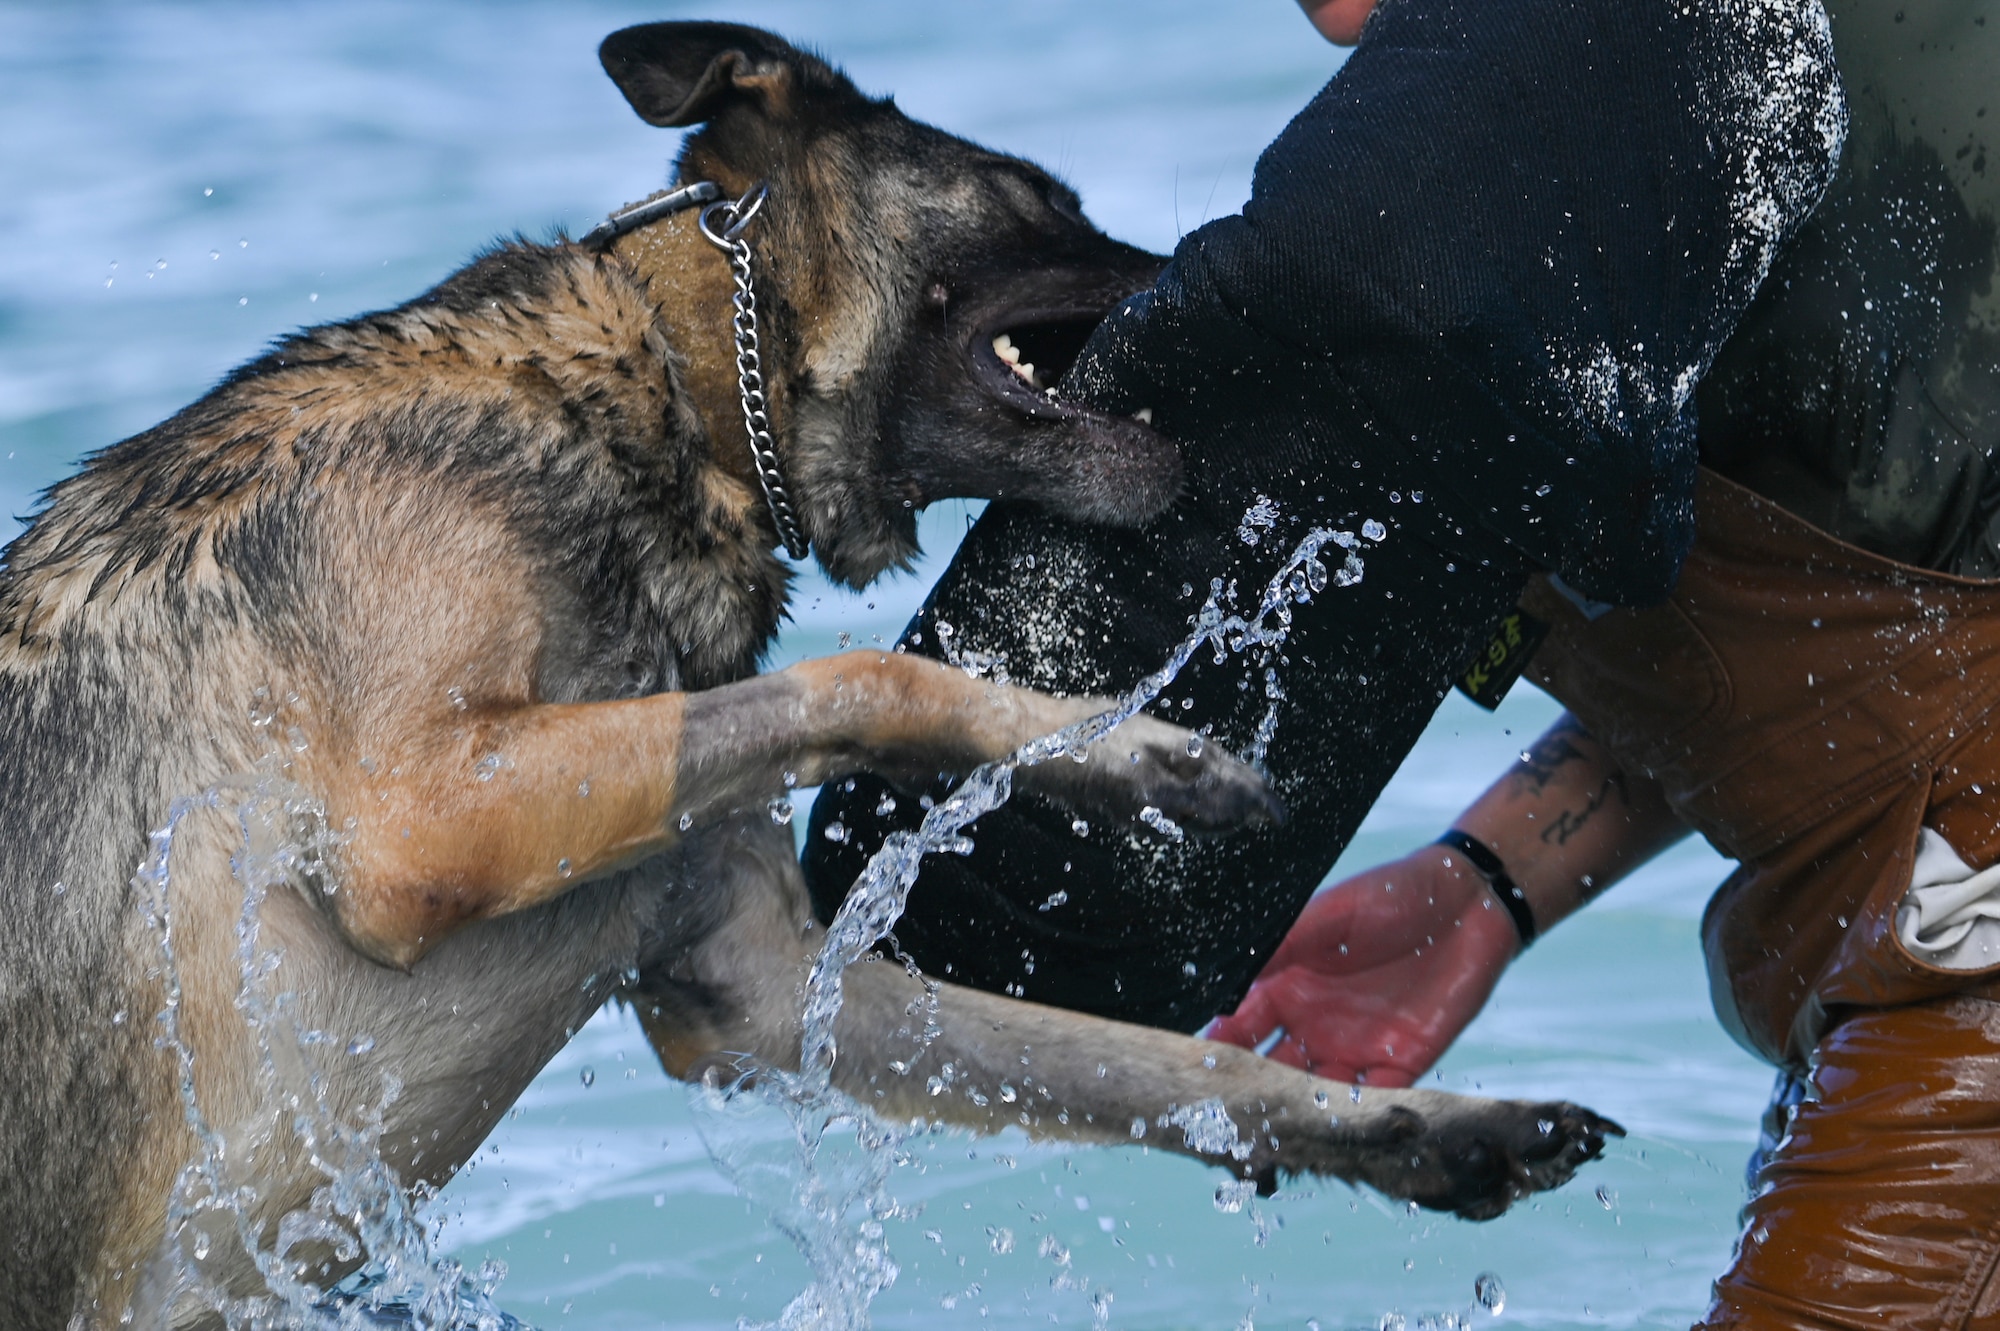 A dog biting someone in the water